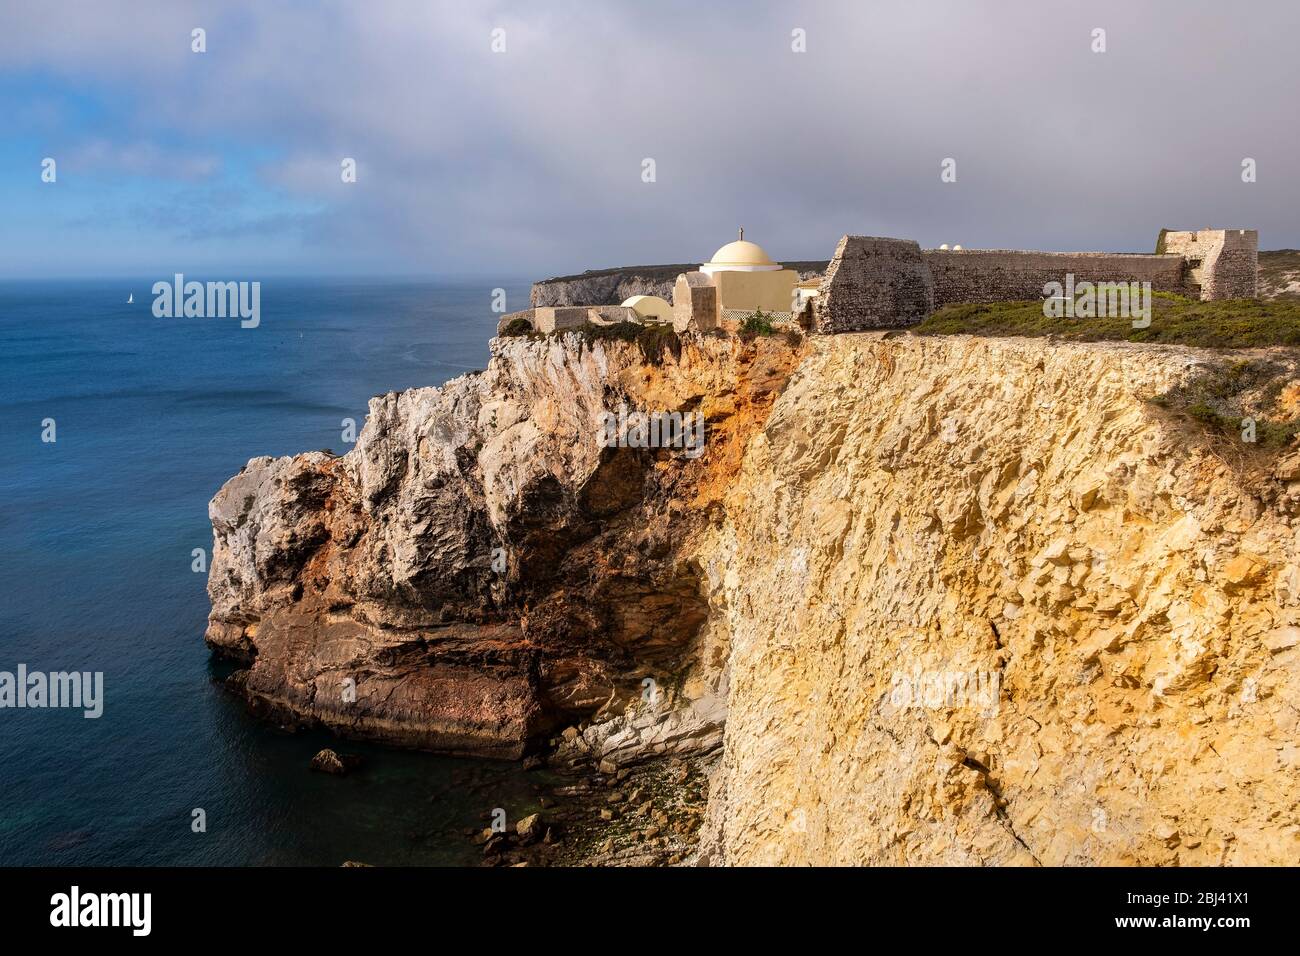 Fort of Santo António de Belixe and Cliff at Cabo de Sao Vincente. Solo Backpacker Trekking on the Rota Vicentina and Fishermen's Trail in Algarve, Po Stock Photo